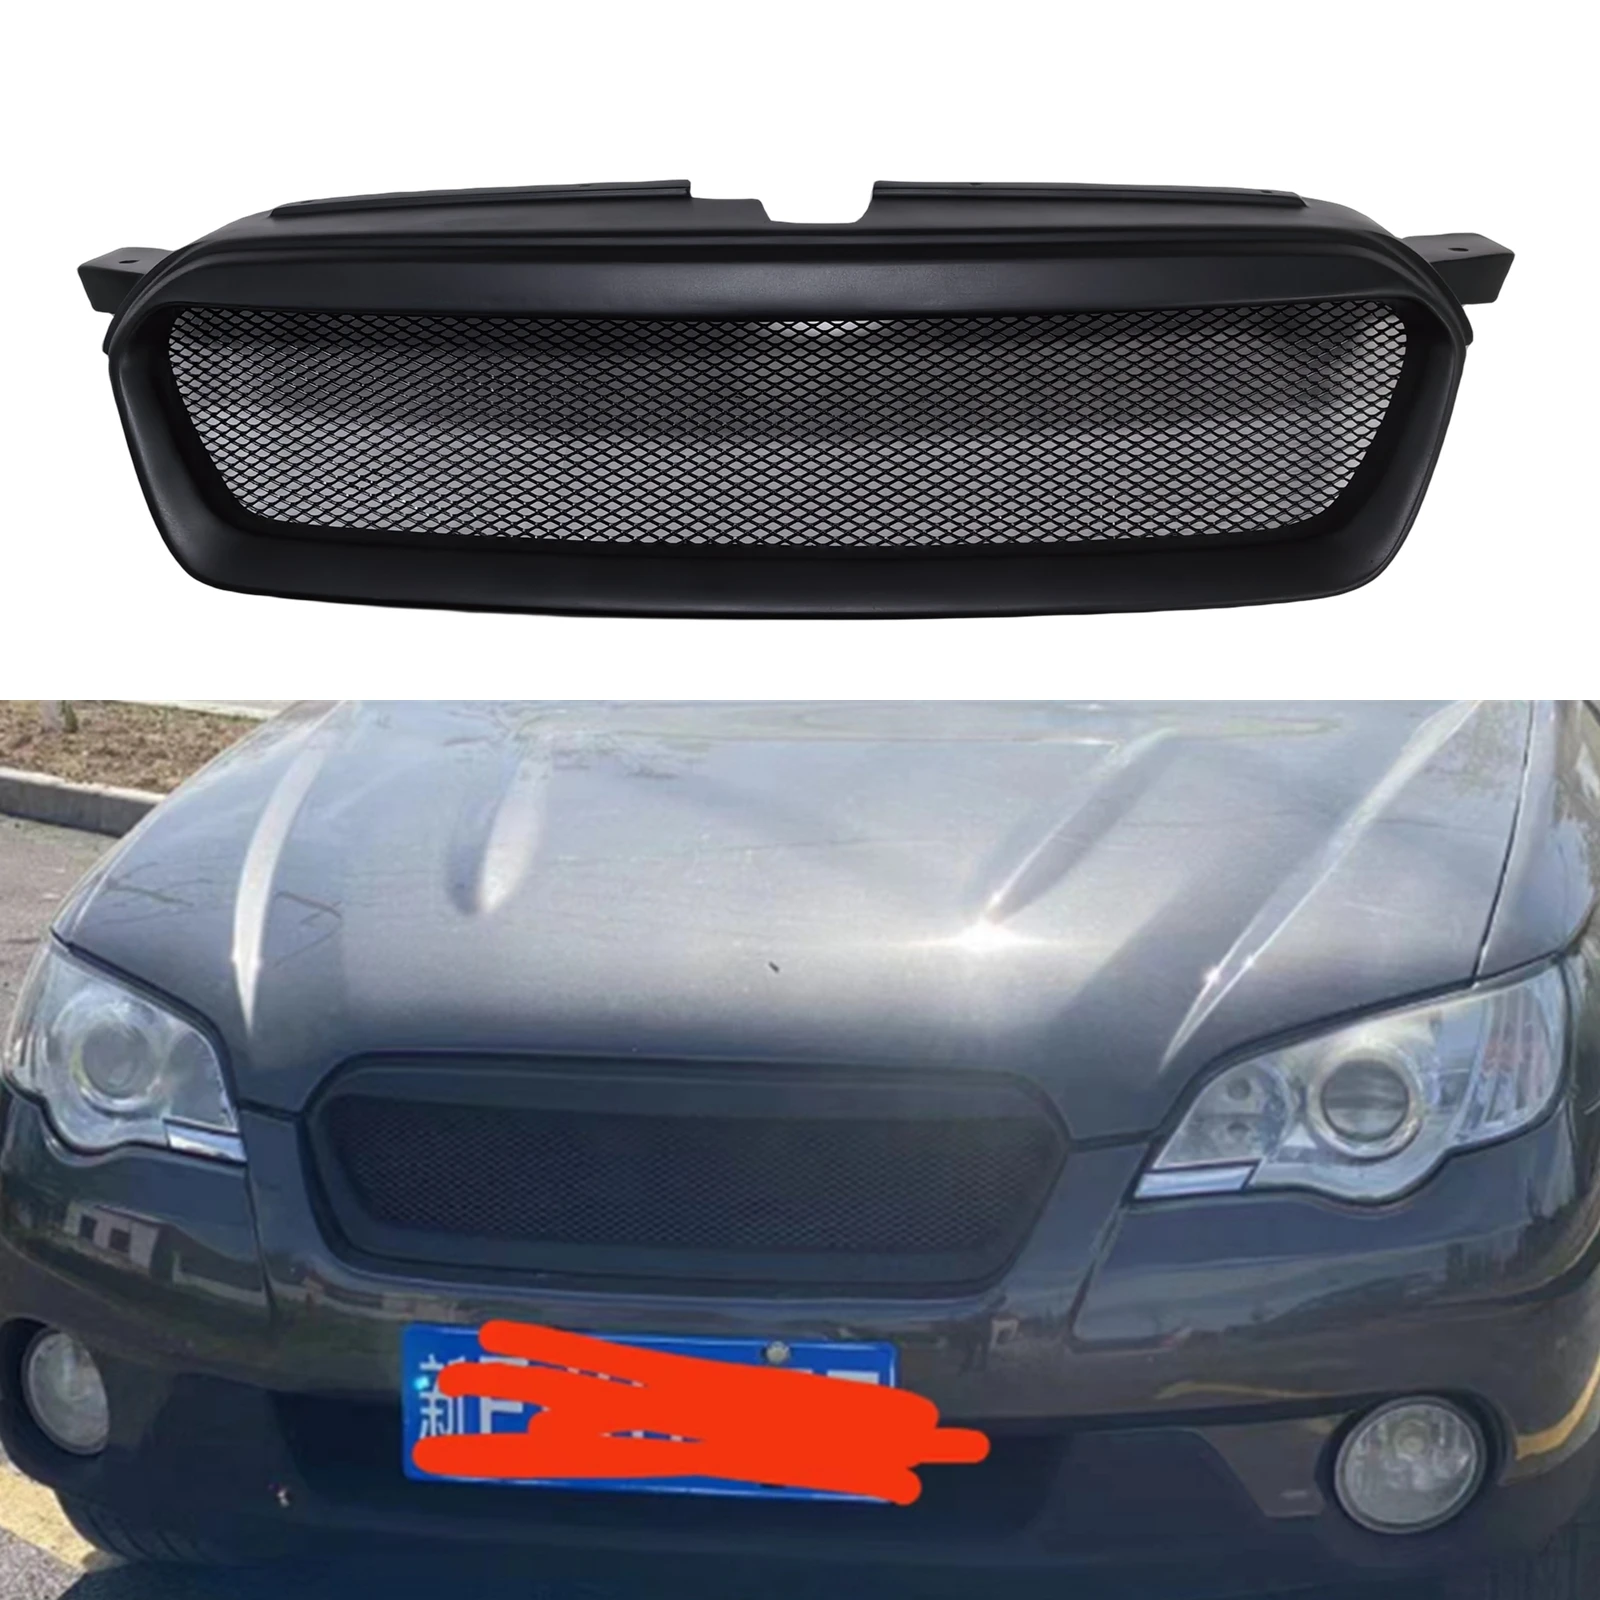 

Front Grille Racing Grill For Subaru Outback 2007 2008 2009 Honeycomb Style Fiberglass Car Upper Bumper Hood Mesh Body Grid Kit